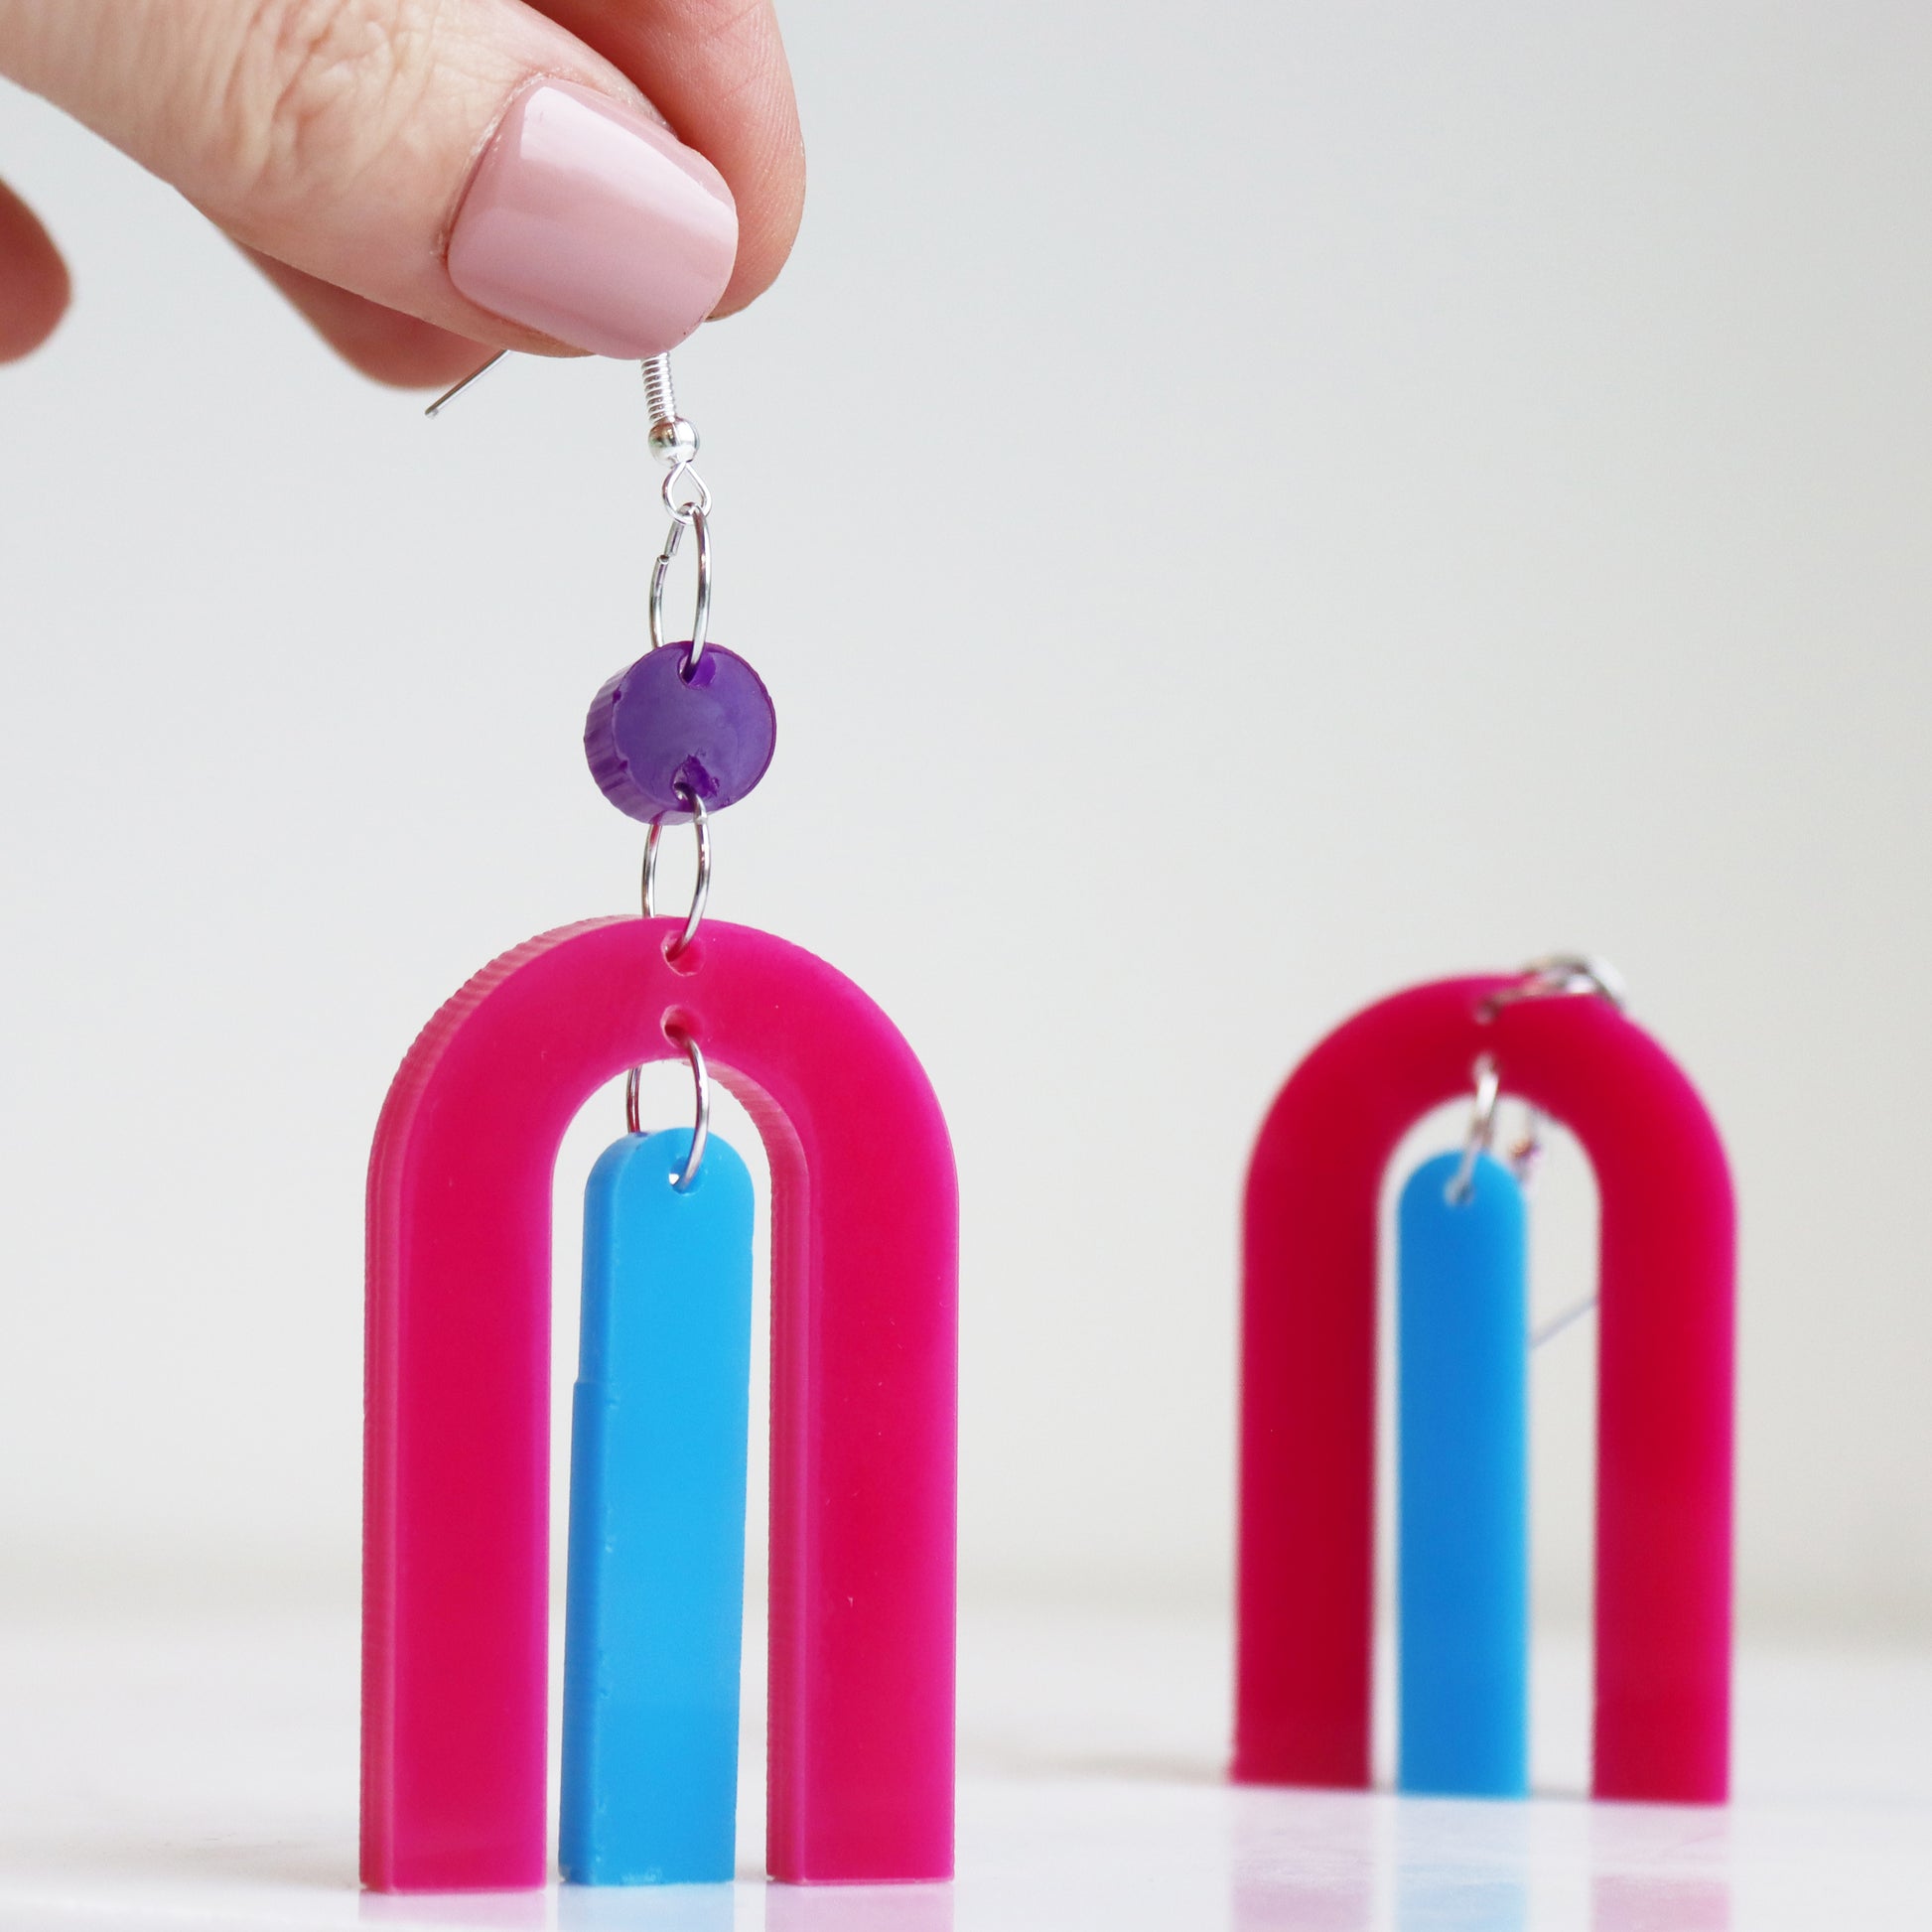 modern bright and colourful geometric arch dangle earrings cut from a purple, pink and turquoise acrylic shown hanging from a hand